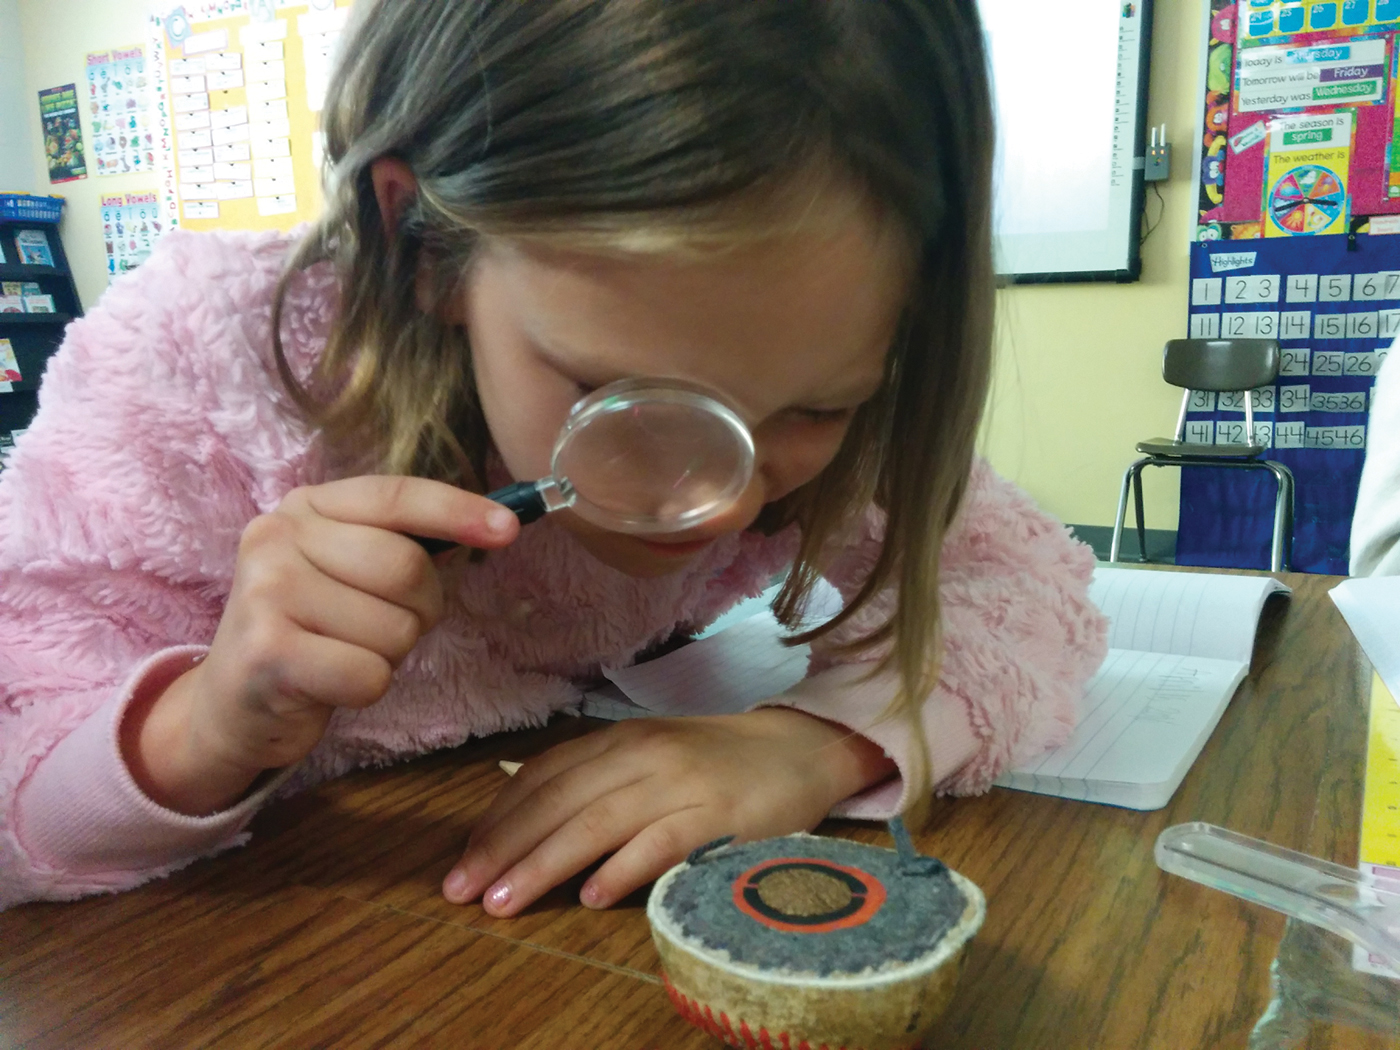 A student makes observations of the materials inside a baseball.